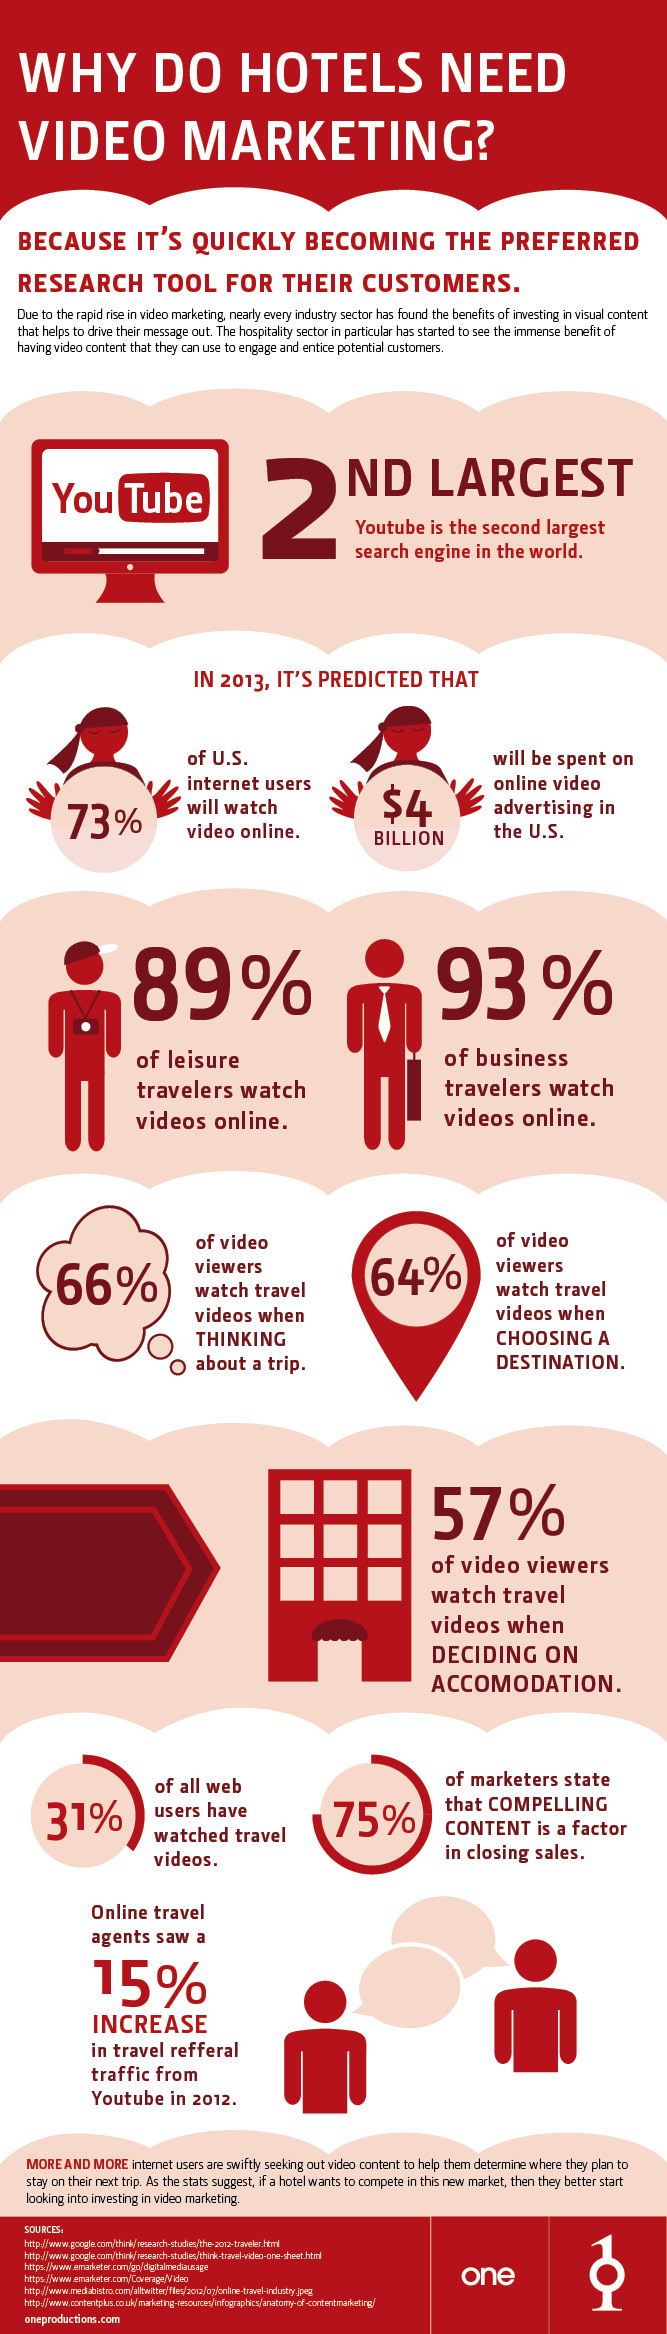 Hotel video marketing infographic NEW (1)